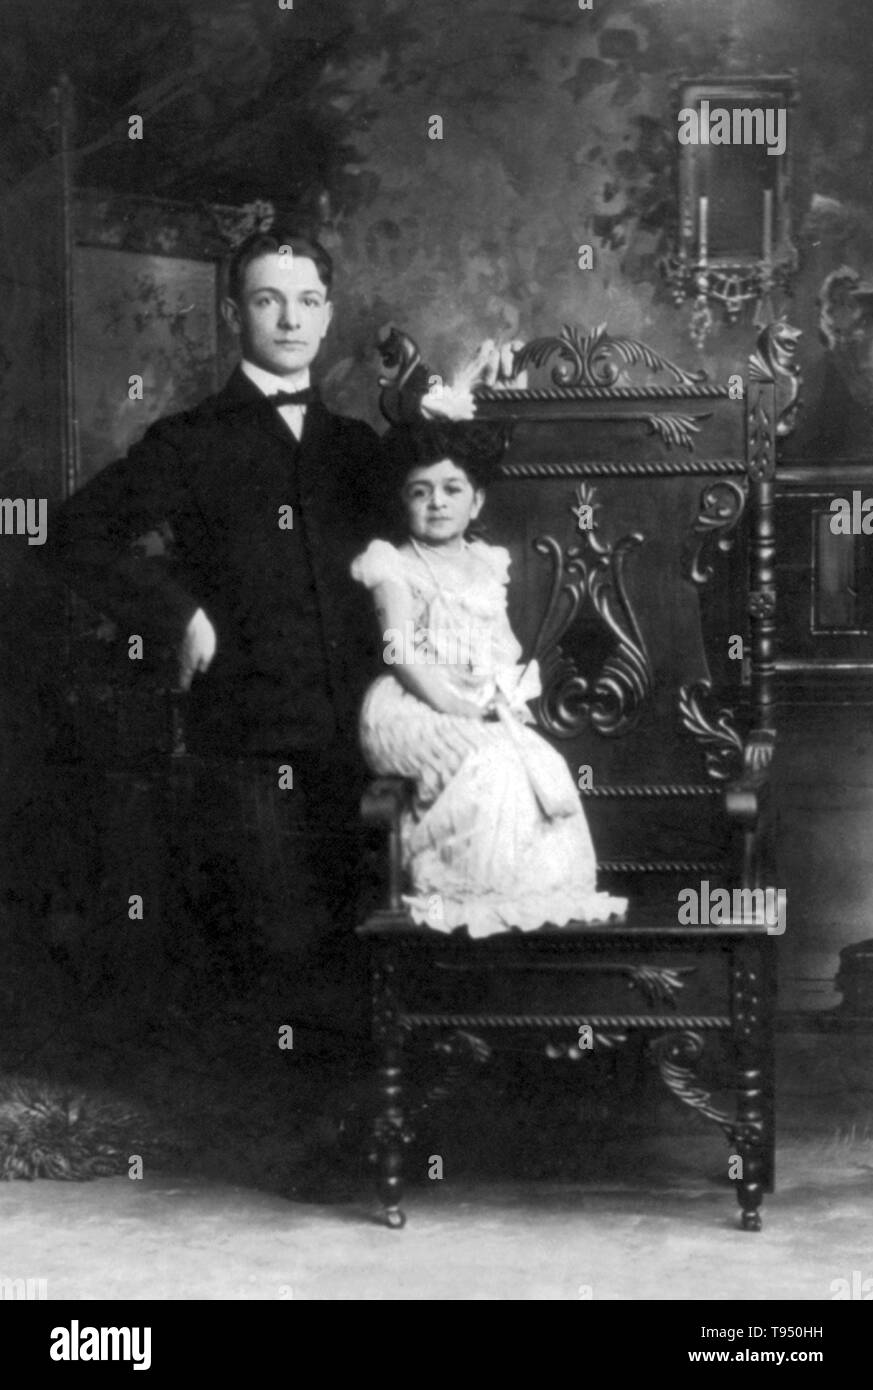 Entitled: 'Mrs. Anthony C. Woeckener of Erie, Pennsylvania, better known as Chiquita, The Doll Queen' seated on arm of chair, with a normal size young man standing alongside. Chiquita, The Doll Queen was born in either Cuba or Mexico. She was an entertainer with the traveling Bostock-Ferari Carnival. Some suspect her 1901 marriage at age 31 to 17 year old Woeckener was done for publicity. Chiquita was a hit at the Pan-American Exposition in 1901. Stock Photo